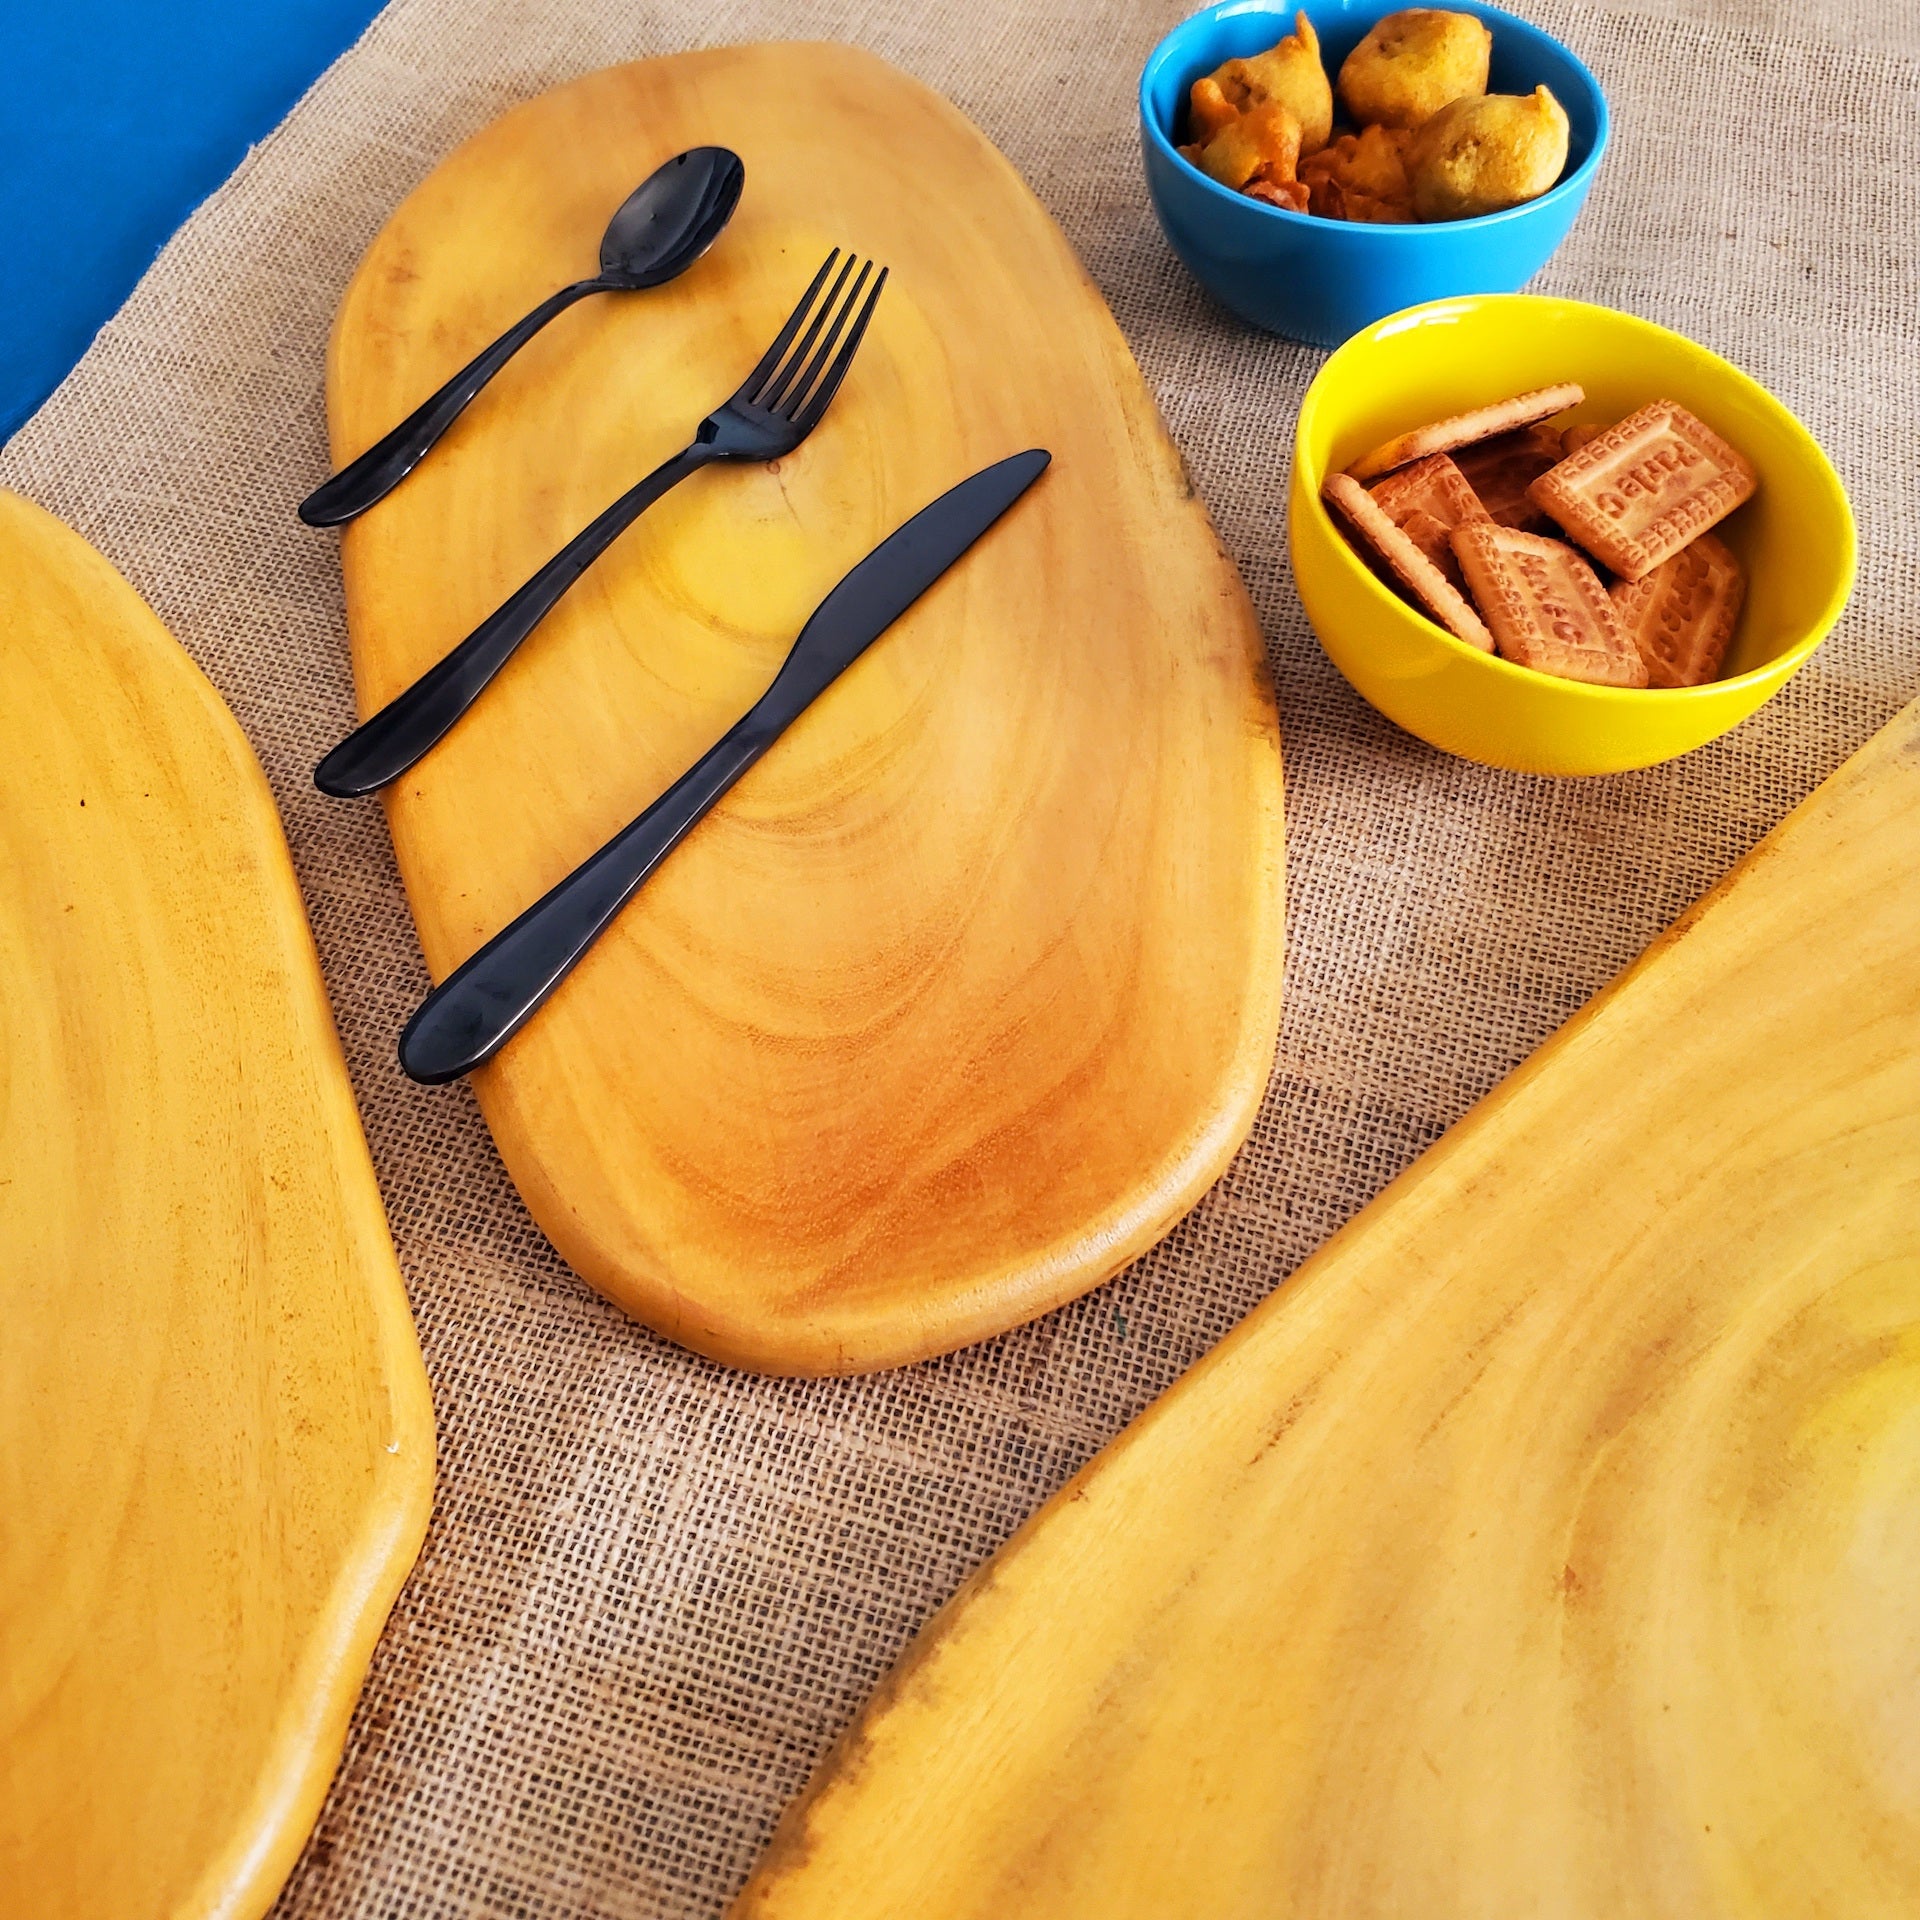 Beautifully Handcrafted food platter shaped like a flat pebble made out of Natural Solid Wood can be used to serve fruits, desserts, or snacks, burgers or sandwiches. The golden yellow color of the wood is so attractive and looks great when placed as a table topper to hold candle holders or flower vase.Perfect gifting idea for the festive season Diwali/ Deepavali, Navratri, Durga Puja, Christmas, other festivals. 